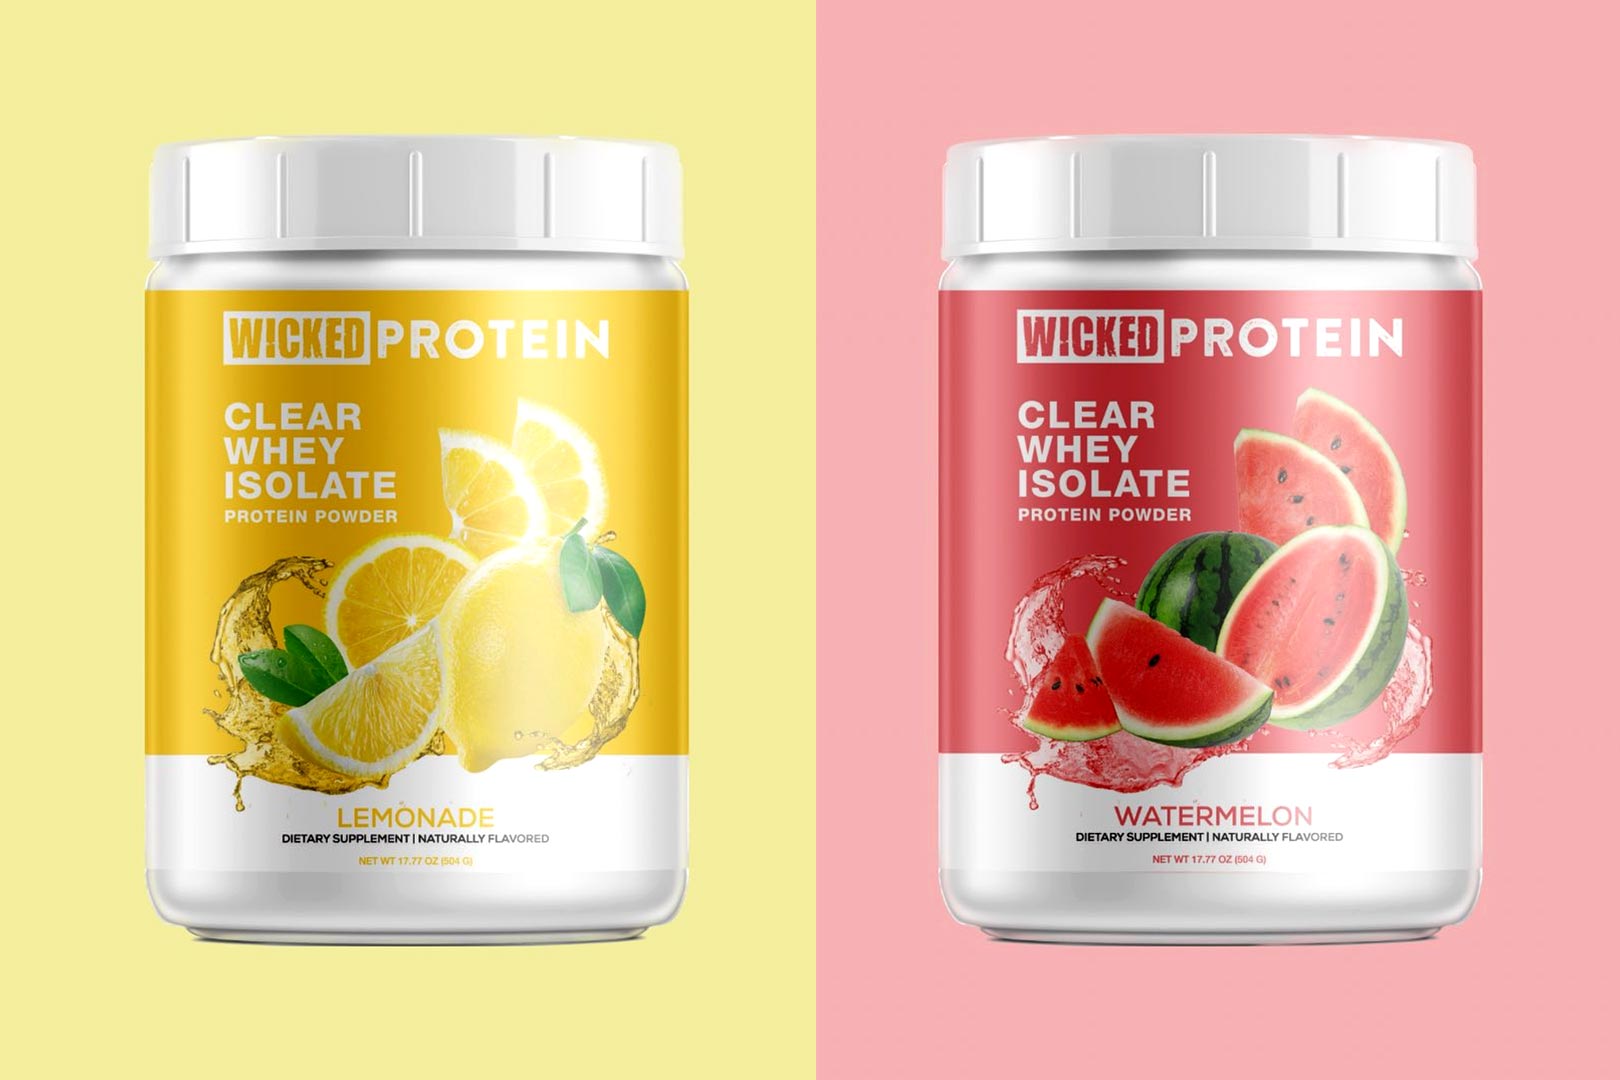 Wicked Protein Lemonade Clear Whey Isolate